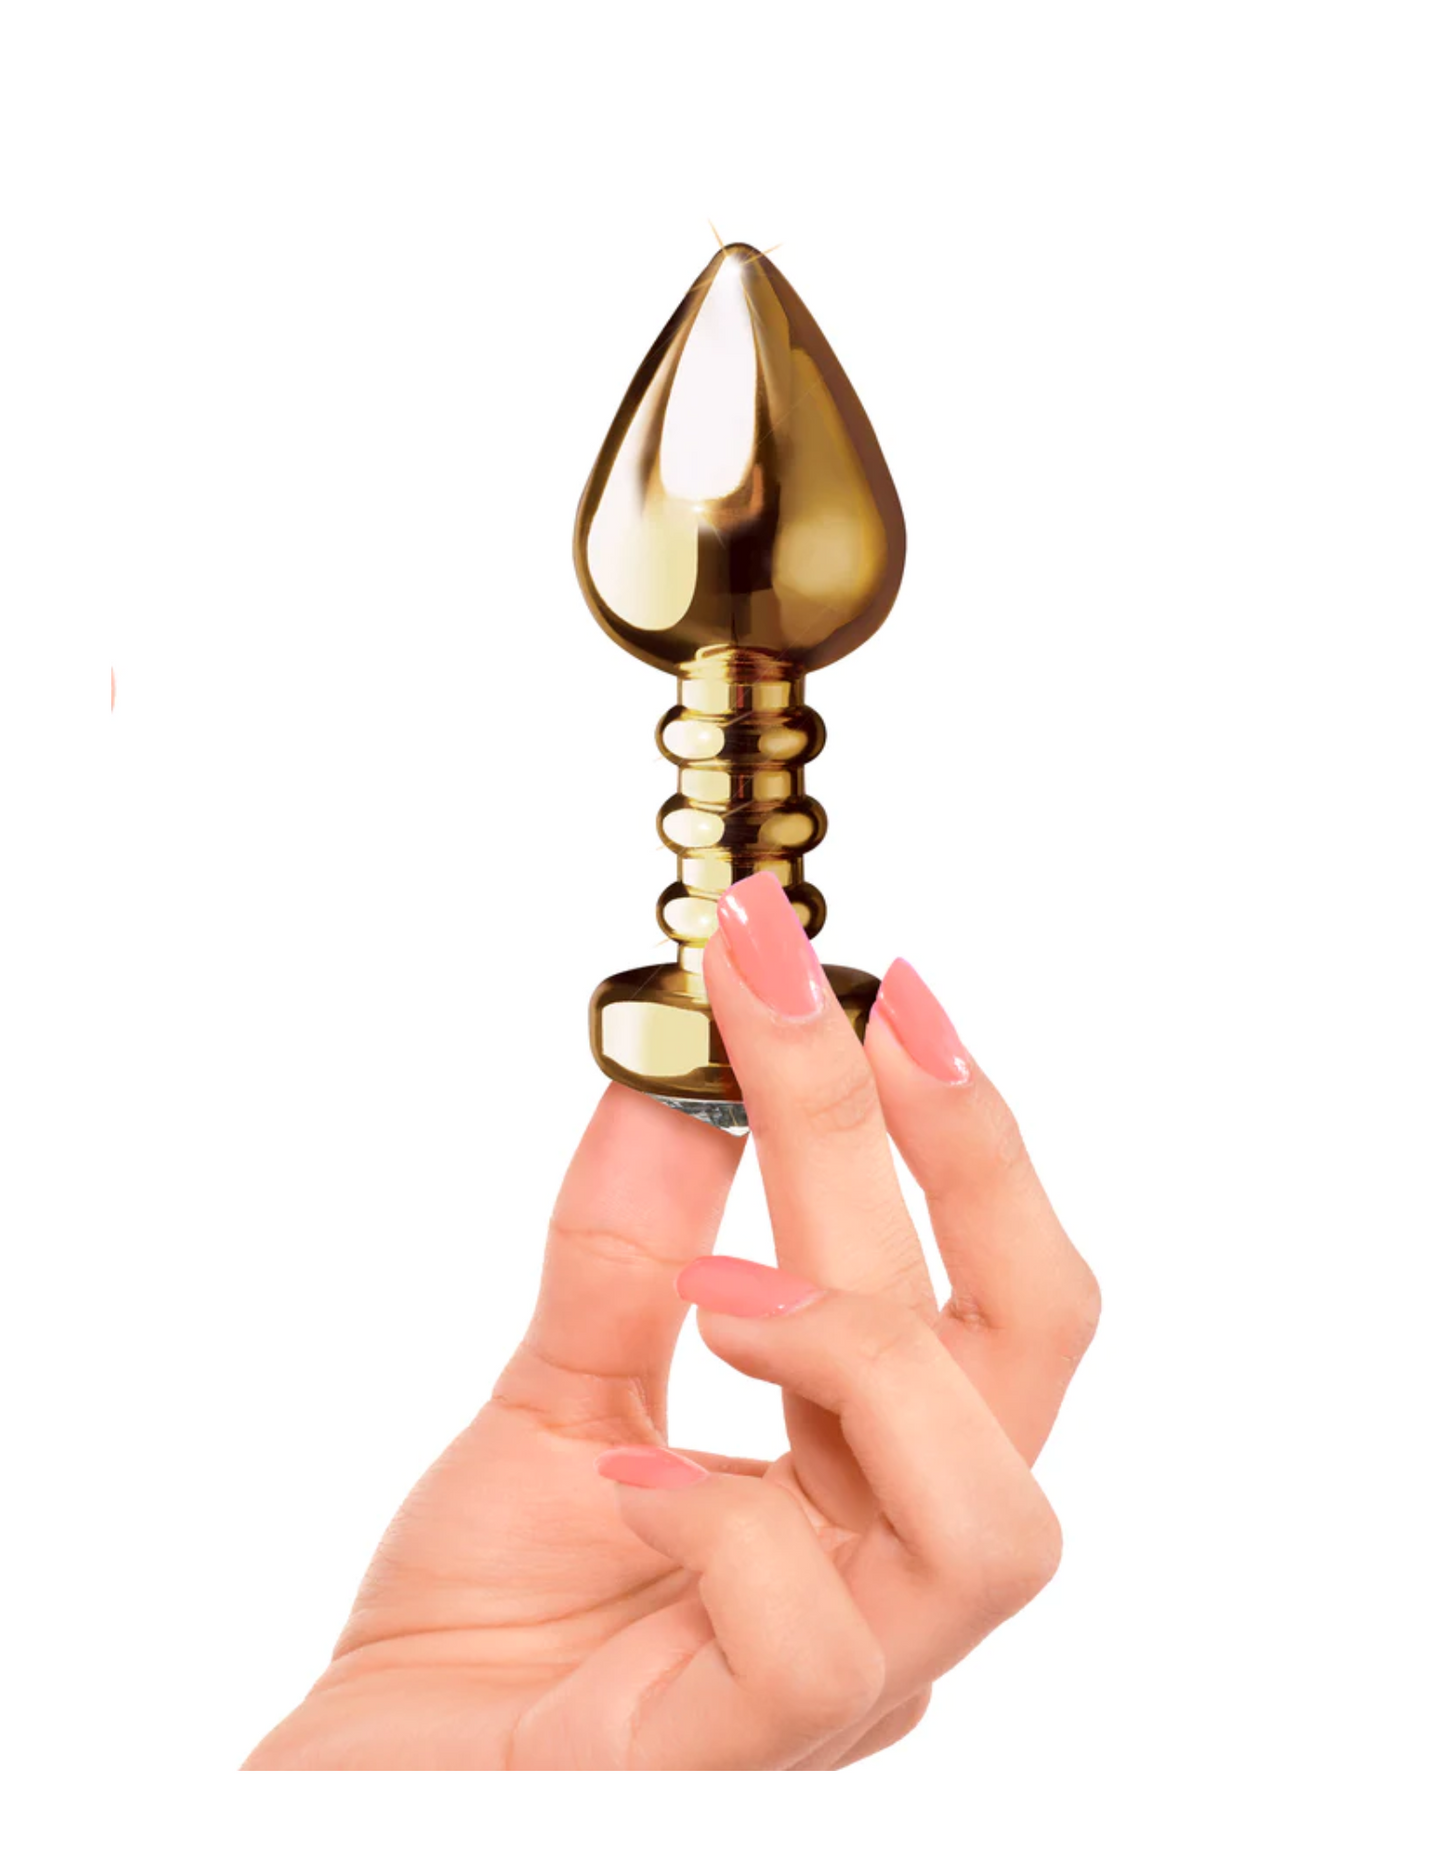 Photo of a hand holding the etish Fantasy Gold Luv Plug from Pipedreams (gold) to show size by comparison.